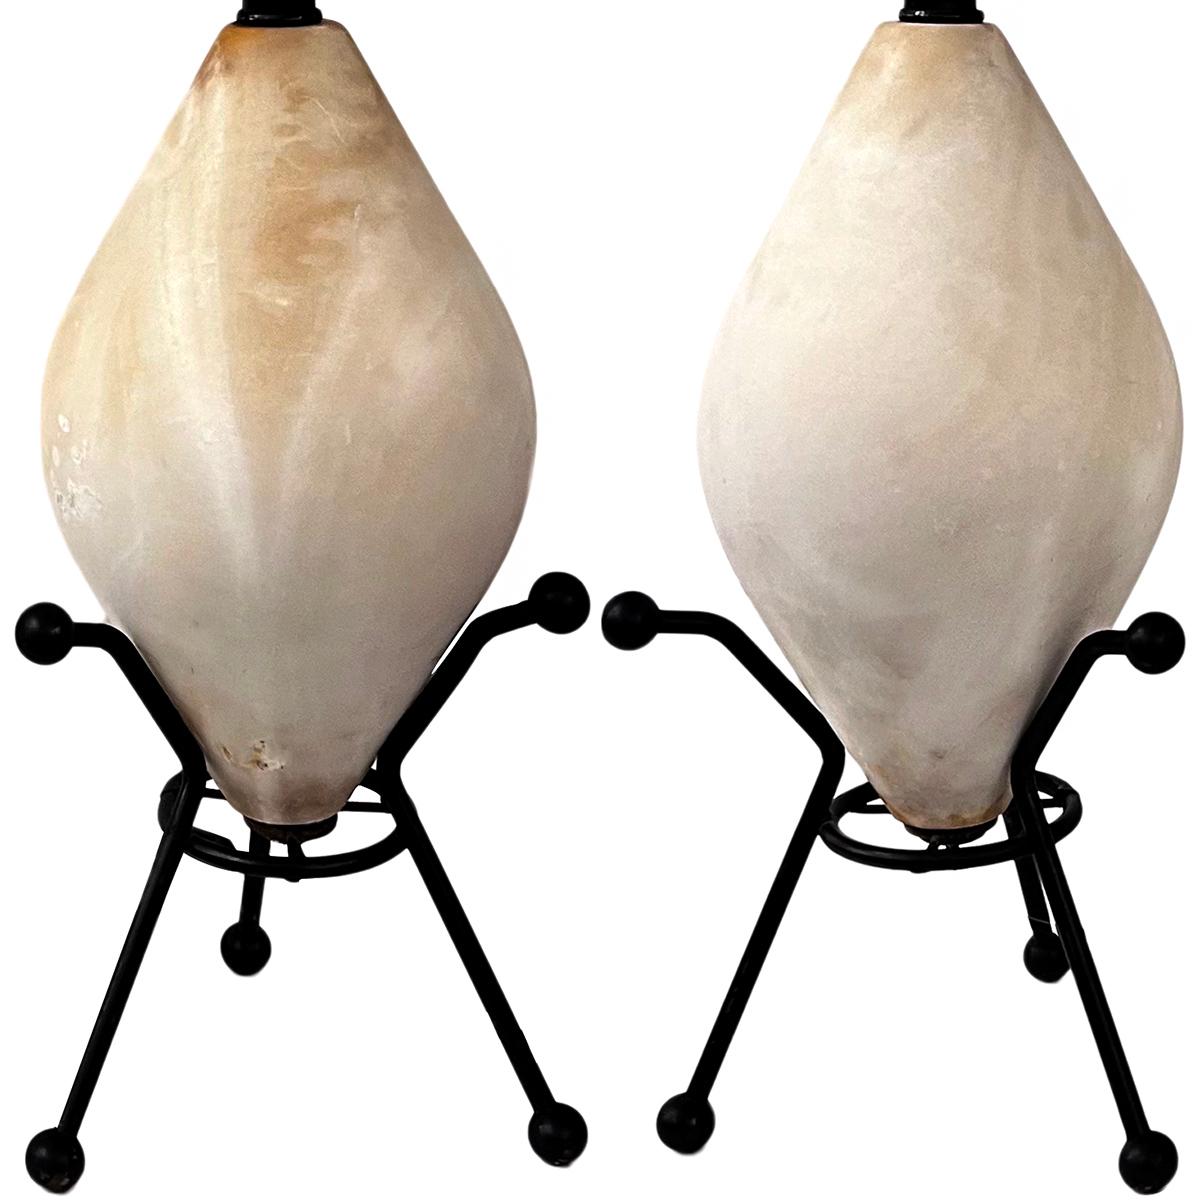 Pair of circa 1950s iron and carved alabaster Italian lamps.

Measurements:
Height of body: 15.75